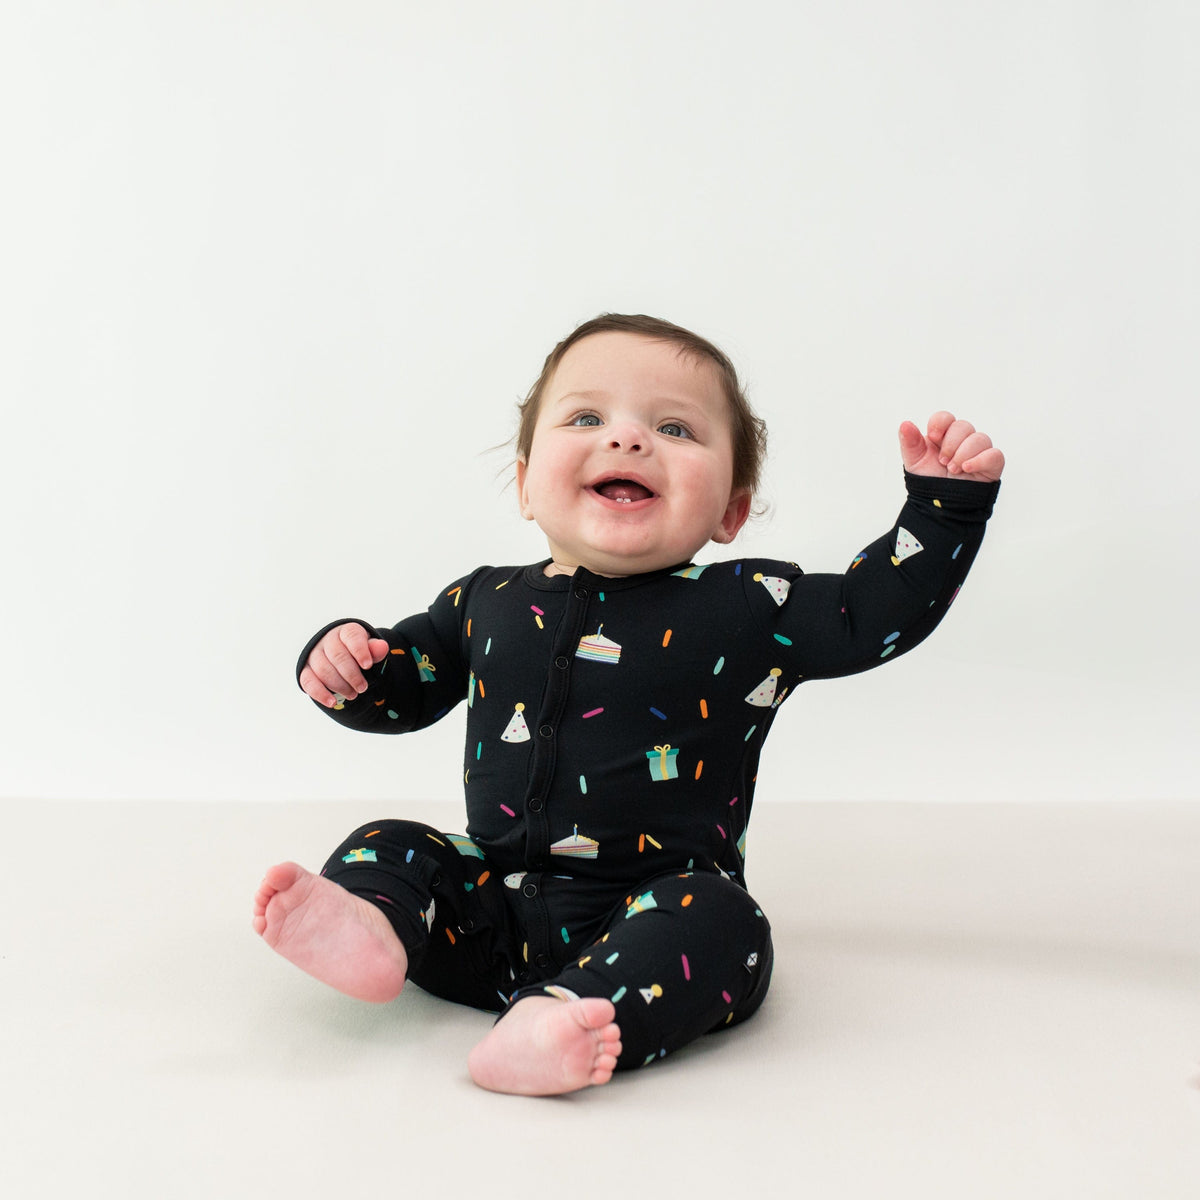 Kyte Baby Snap Romper Romper in Midnight Party